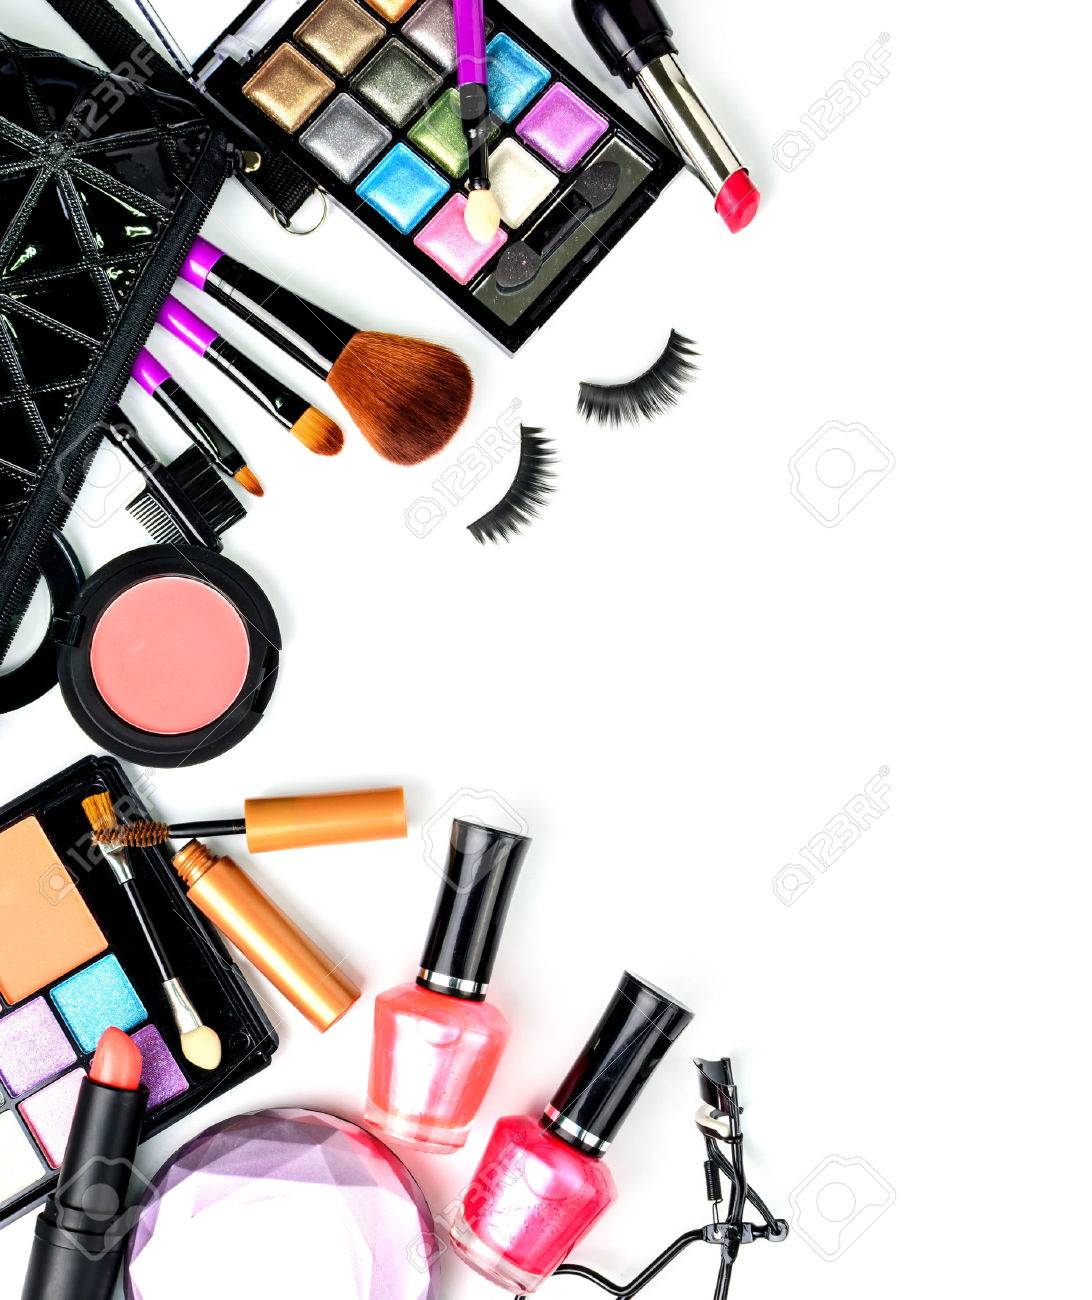 Make Up Bag With Cosmetics And Brushes Isolated On White